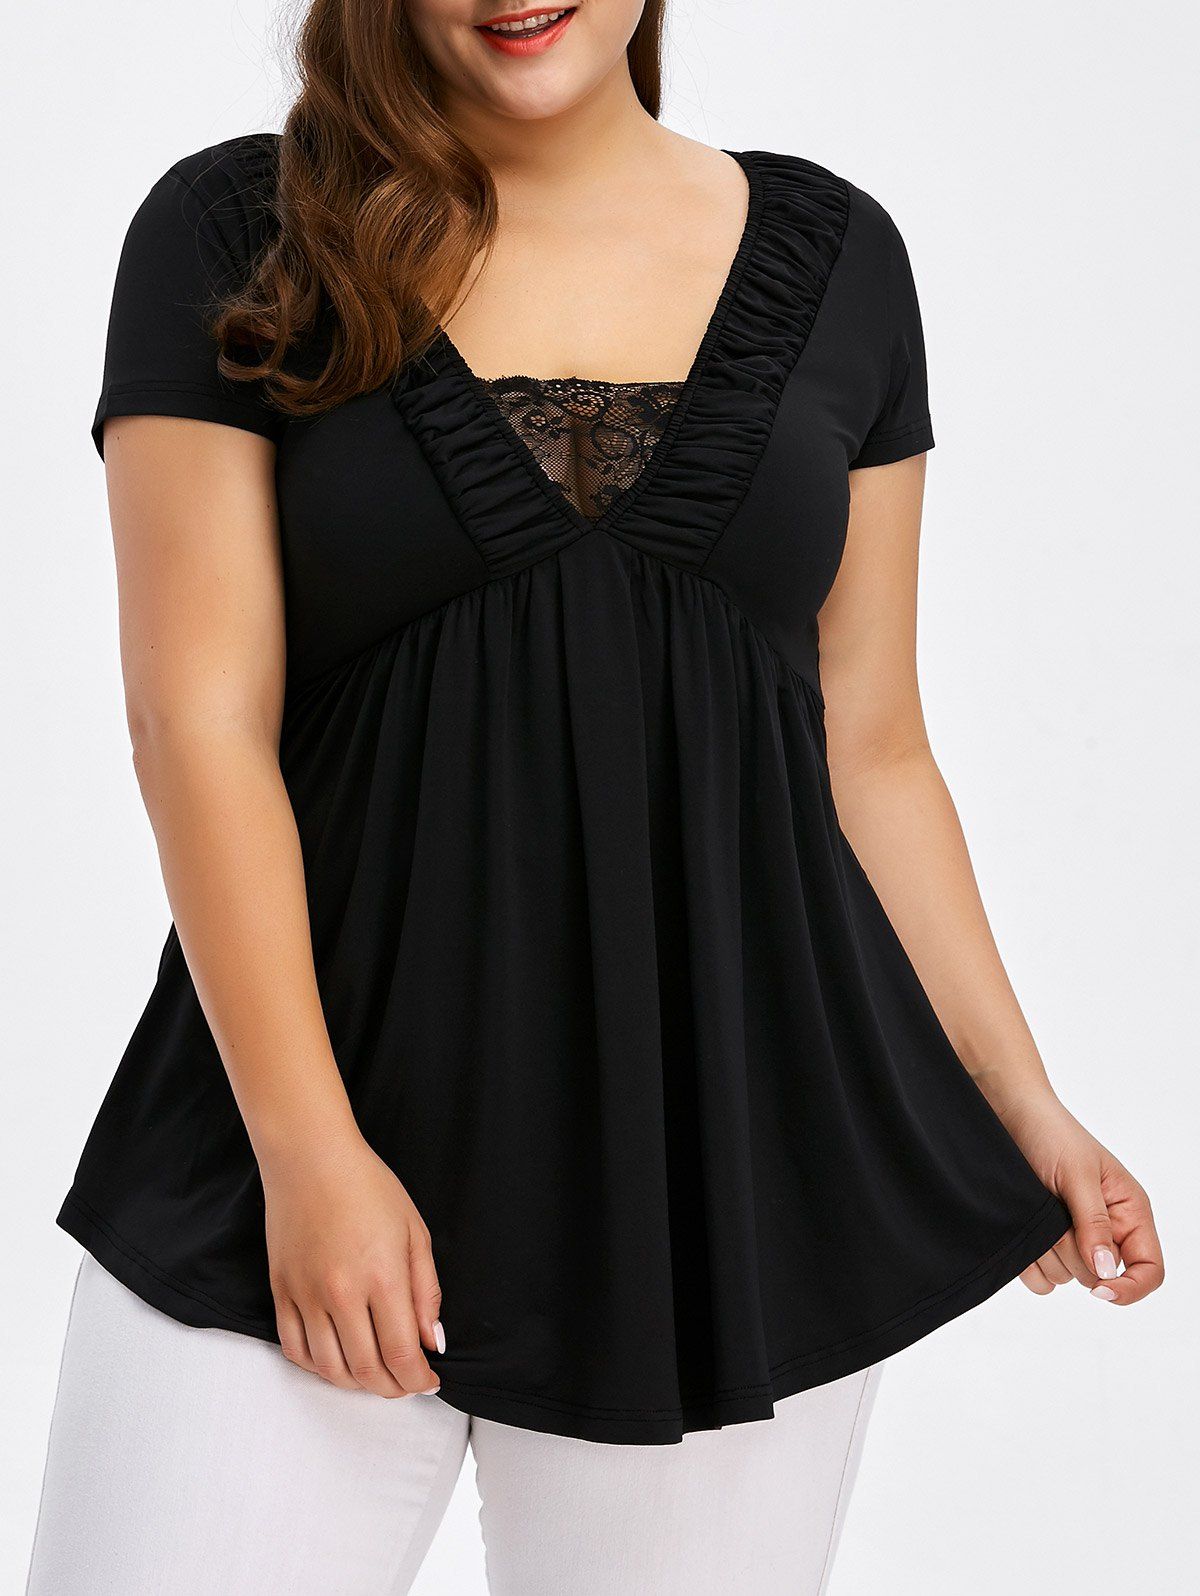 [41% OFF] 2021 Plus Size Lace Insert Empire Waist T-Shirt In BLACK ...